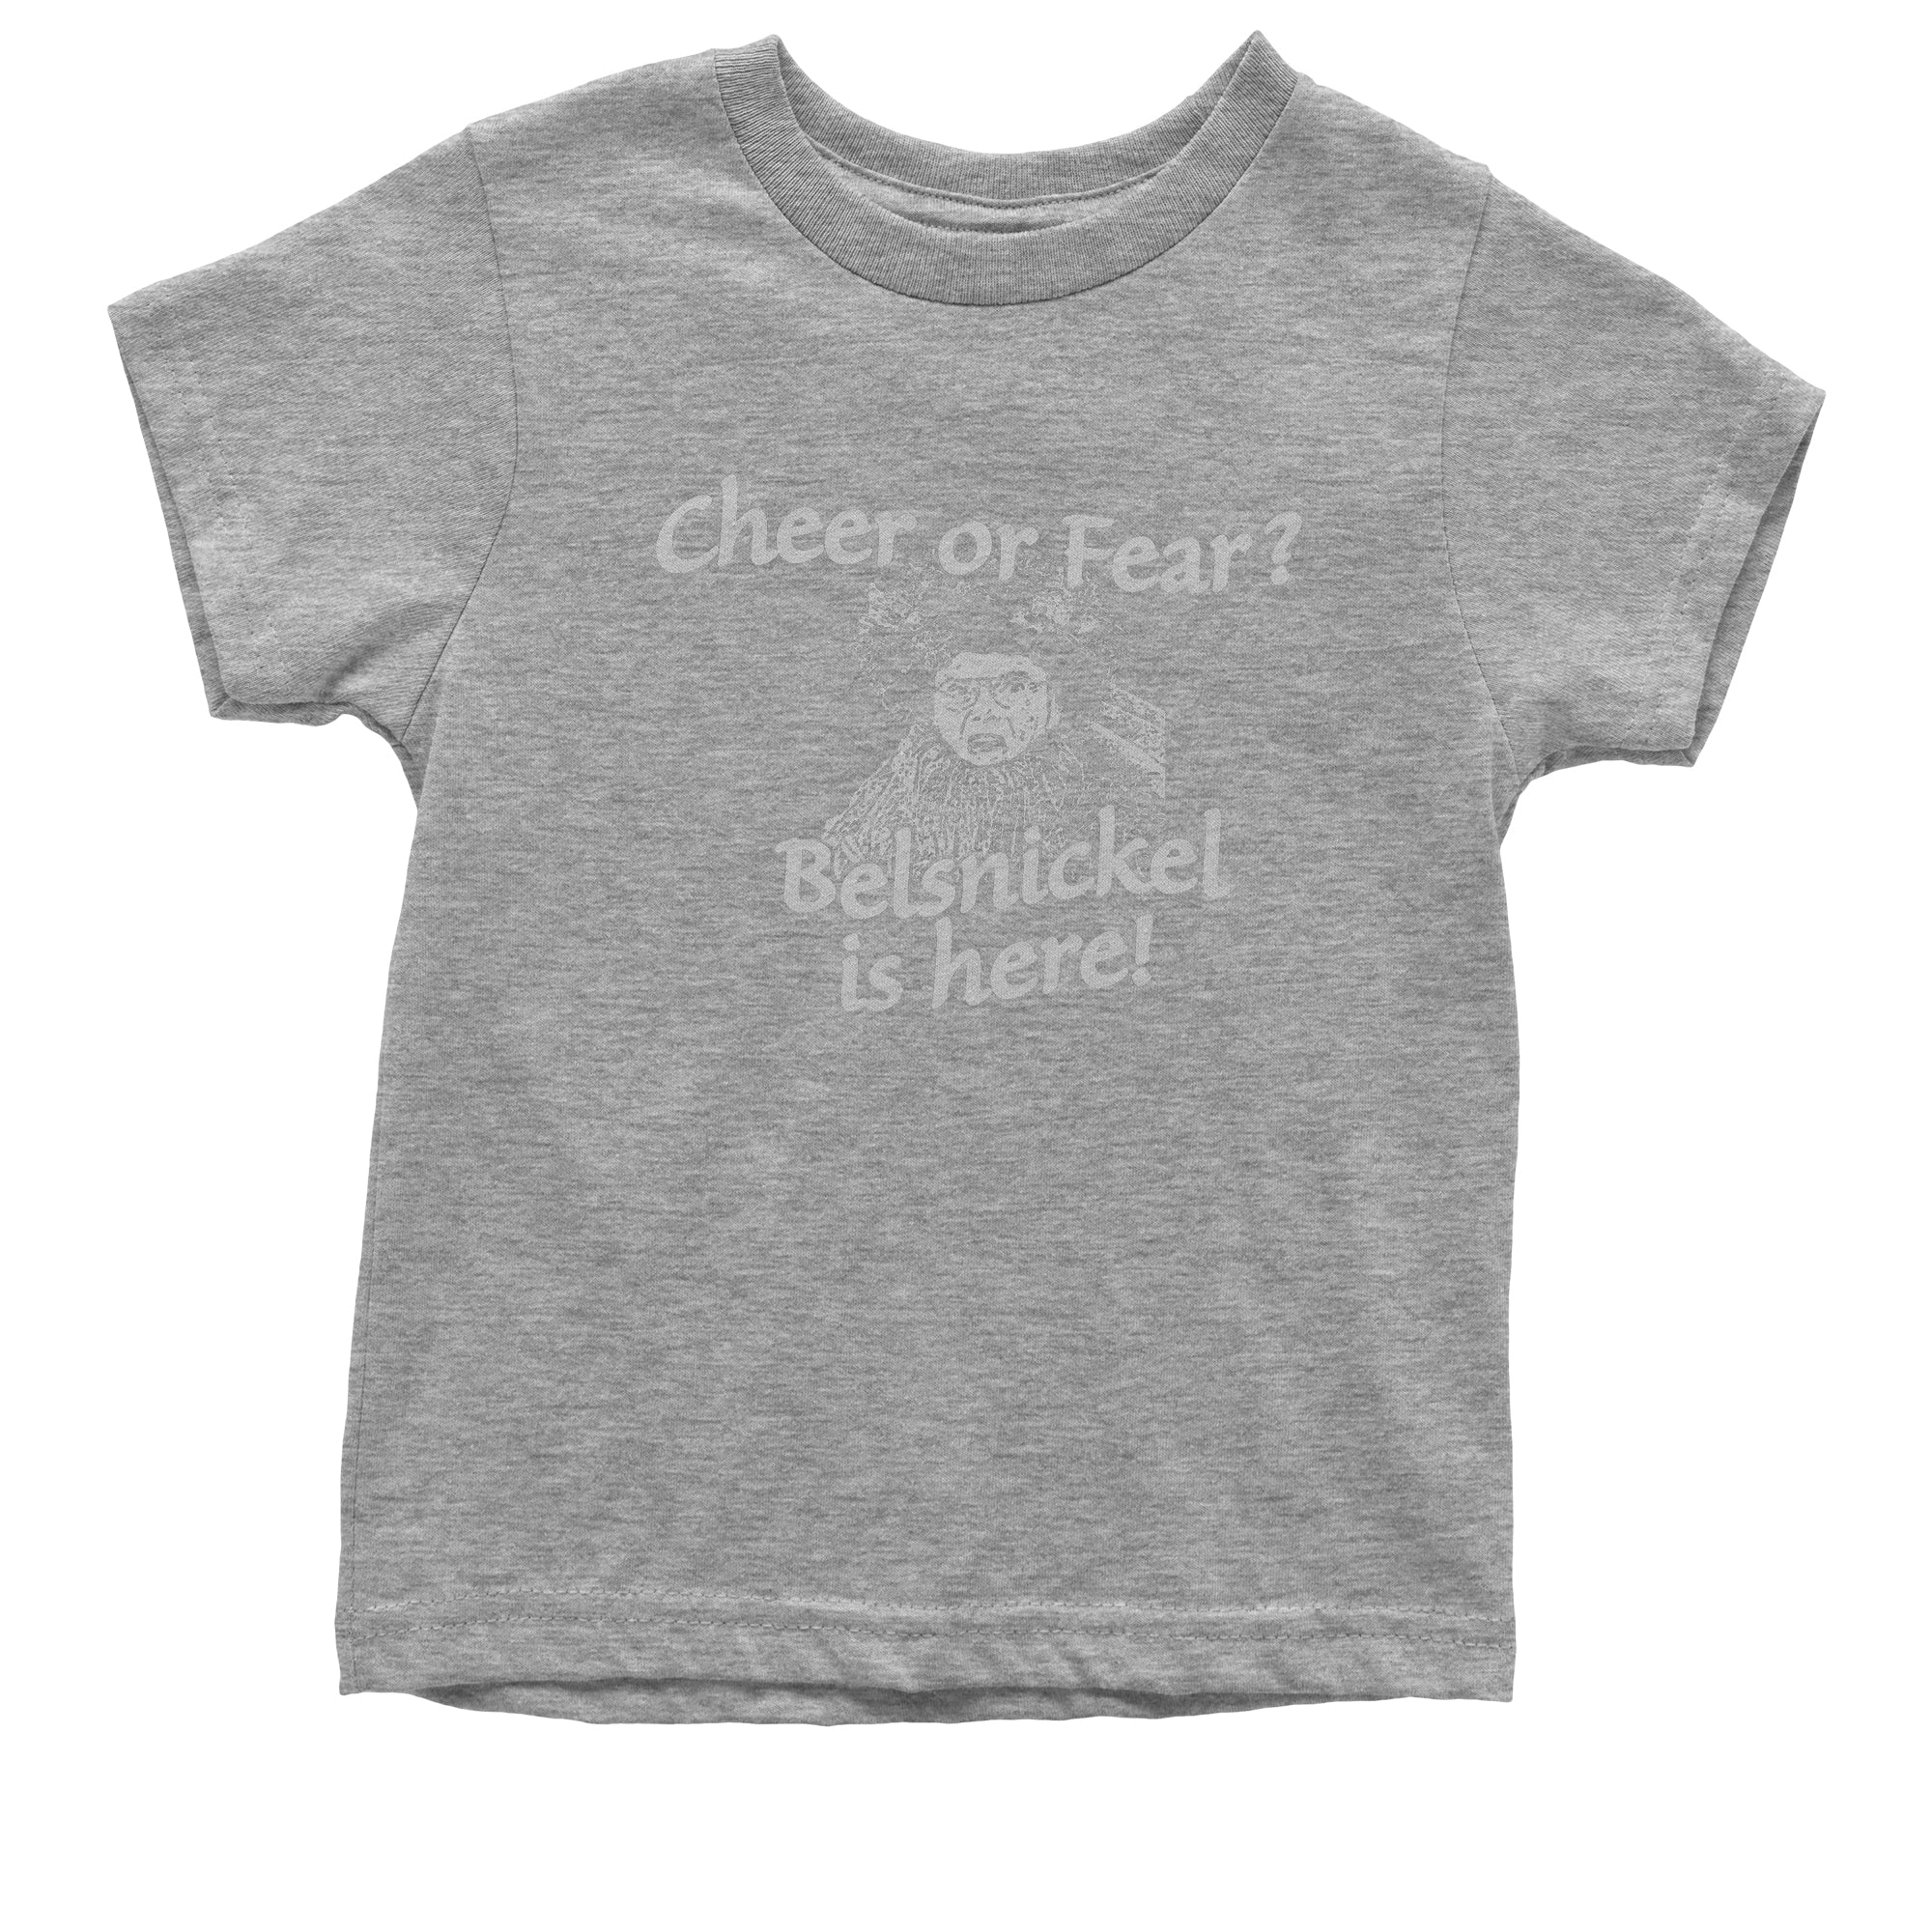 Belsnickel Cheer or Fear Kid's T-Shirt